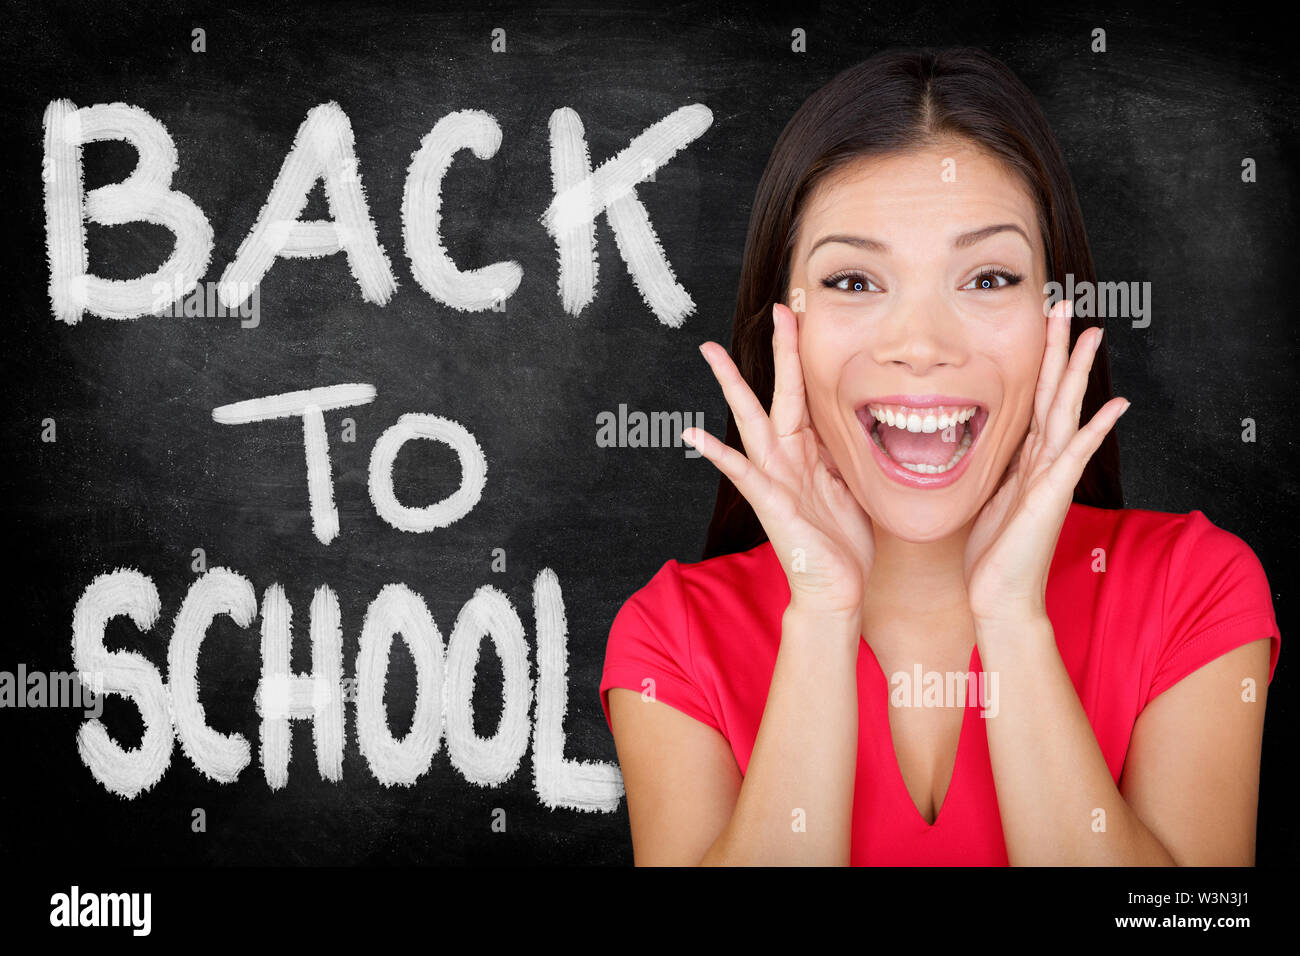 Back to School. Student screaming yelling BACK TO SCHOOL with text on blackboard. Female university college student standing in front of chalkboard. Ethnic Asian Caucasian woman student. Stock Photo